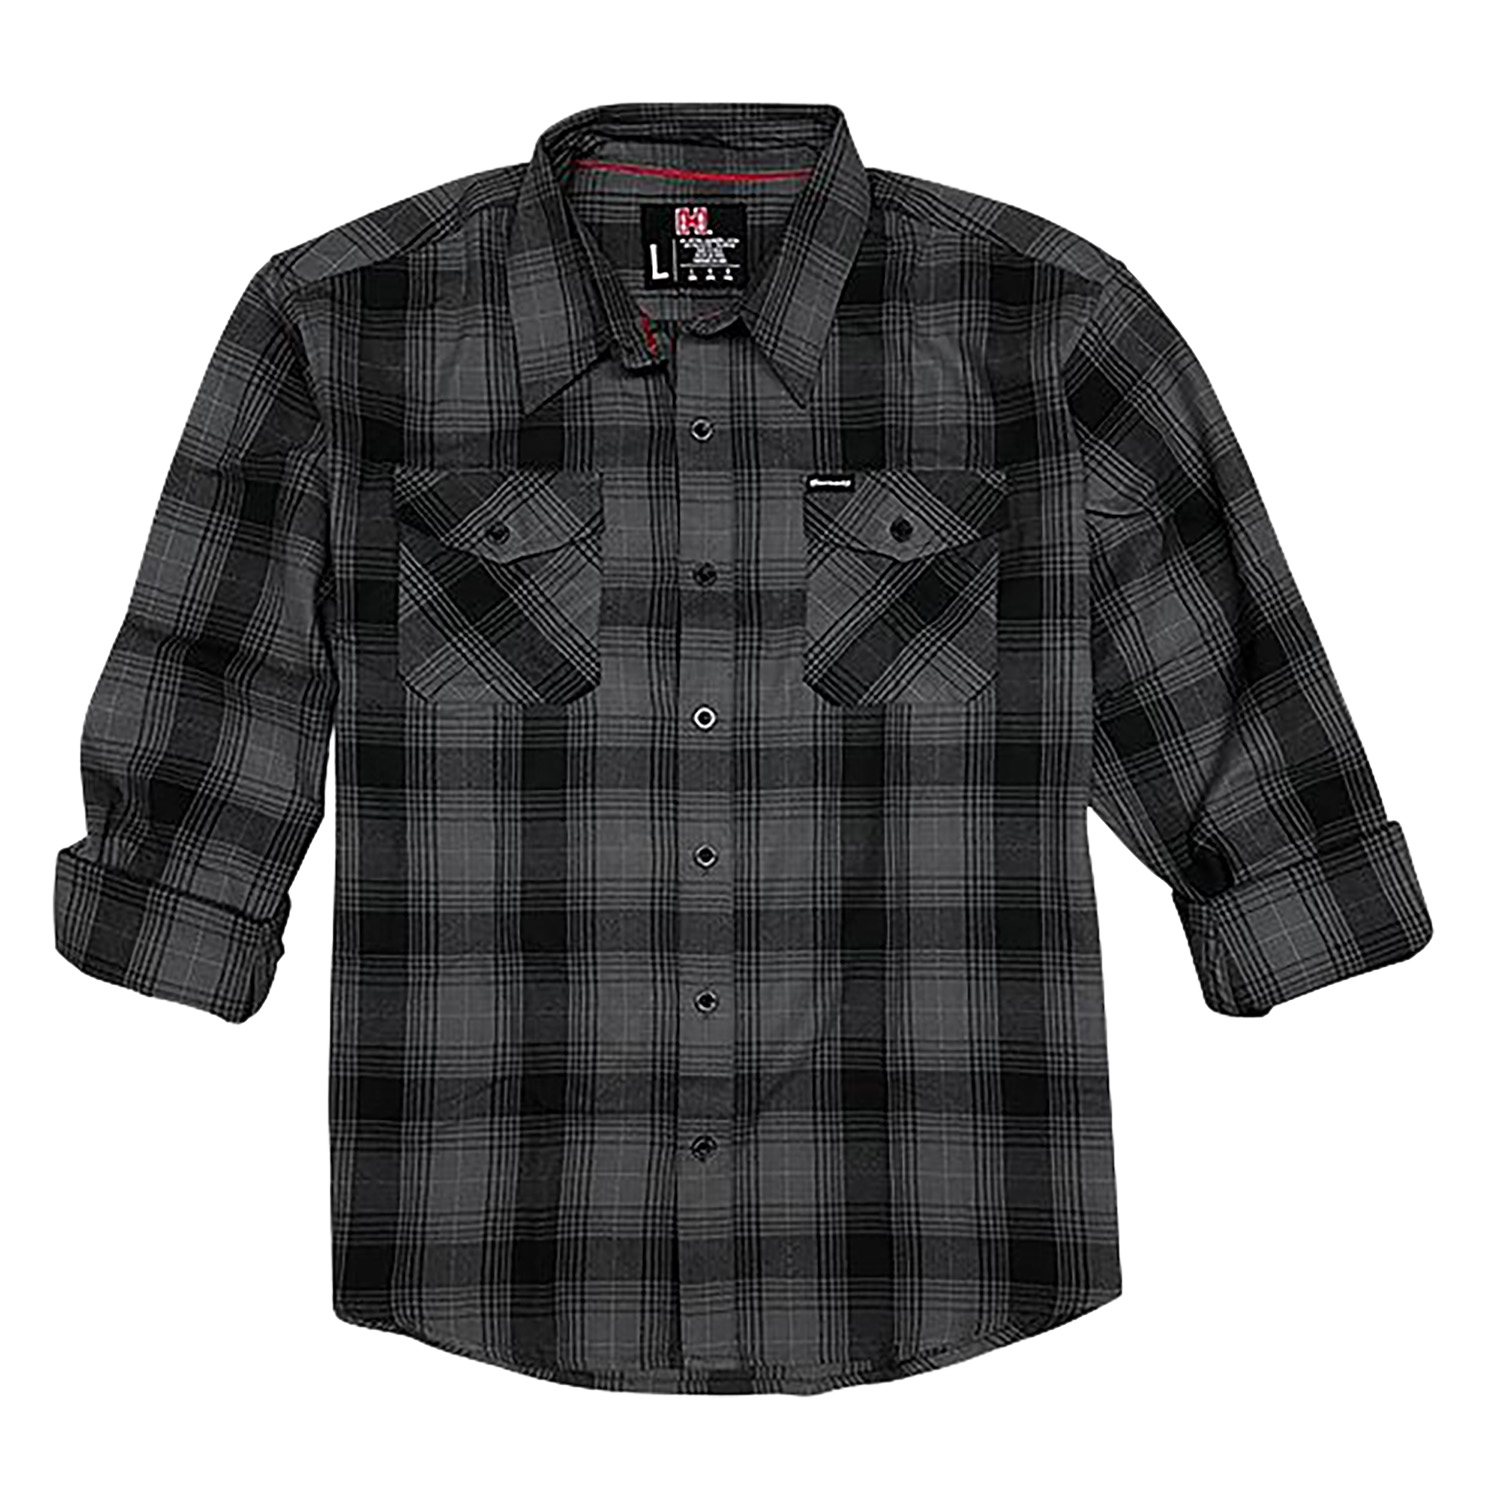 Hornady Gear 32224 Flannel Shirt Xl Gray/Black, Cotton/Polyester, Relaxed Fit Button Up